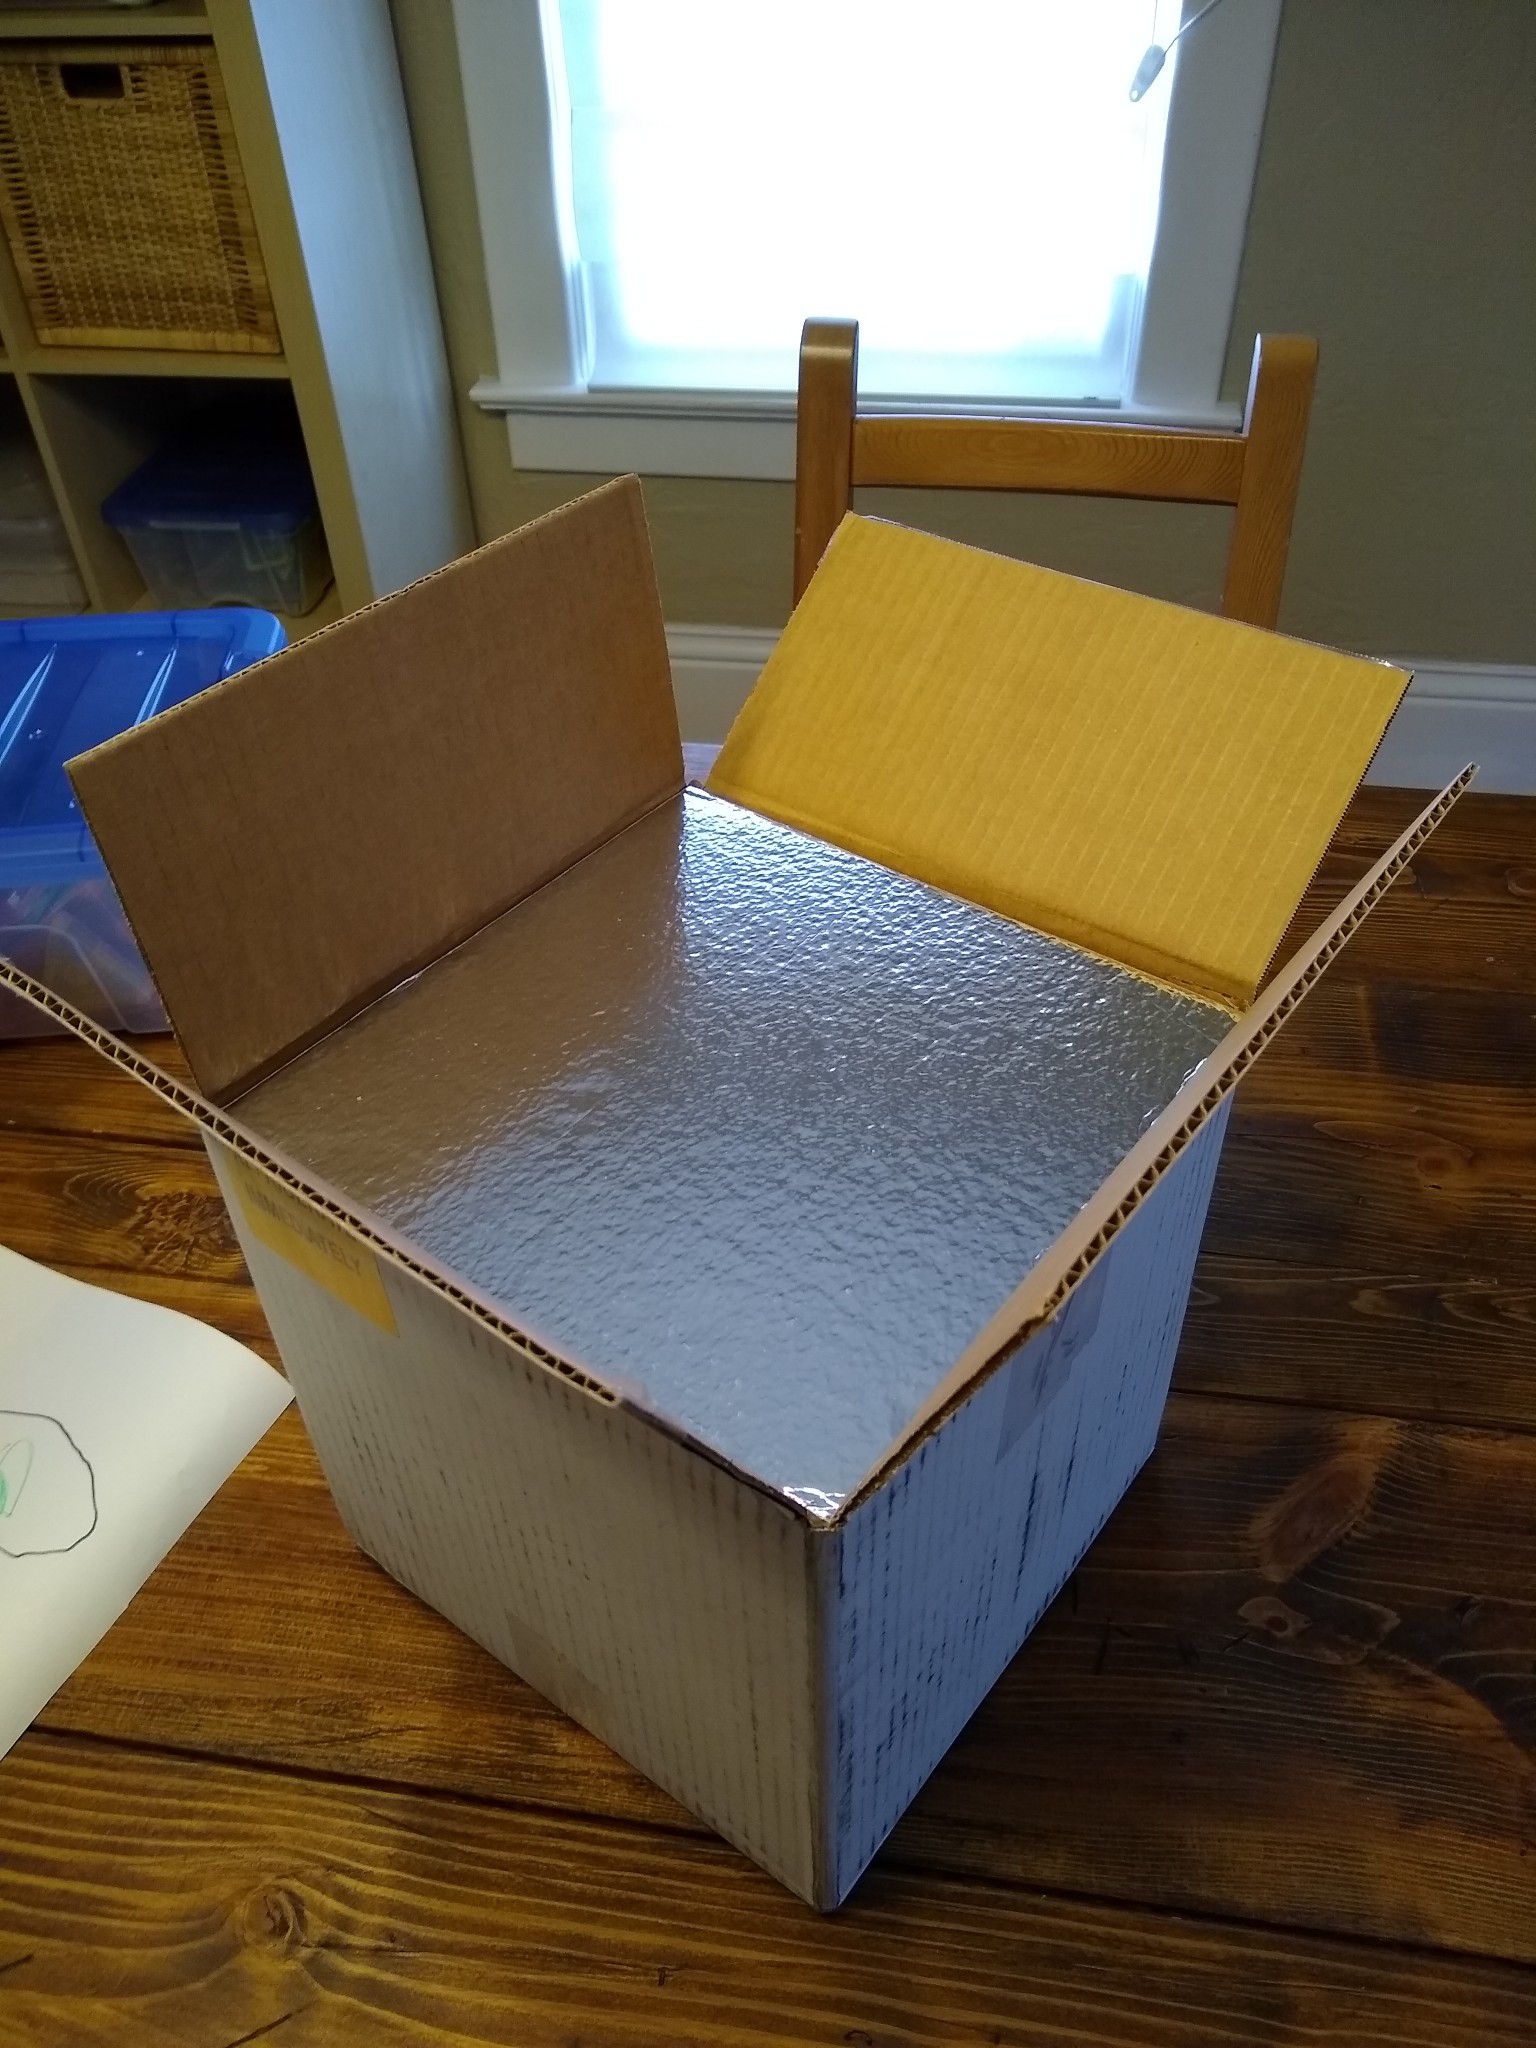 Free Insulated Mailing Box with Cold Packs